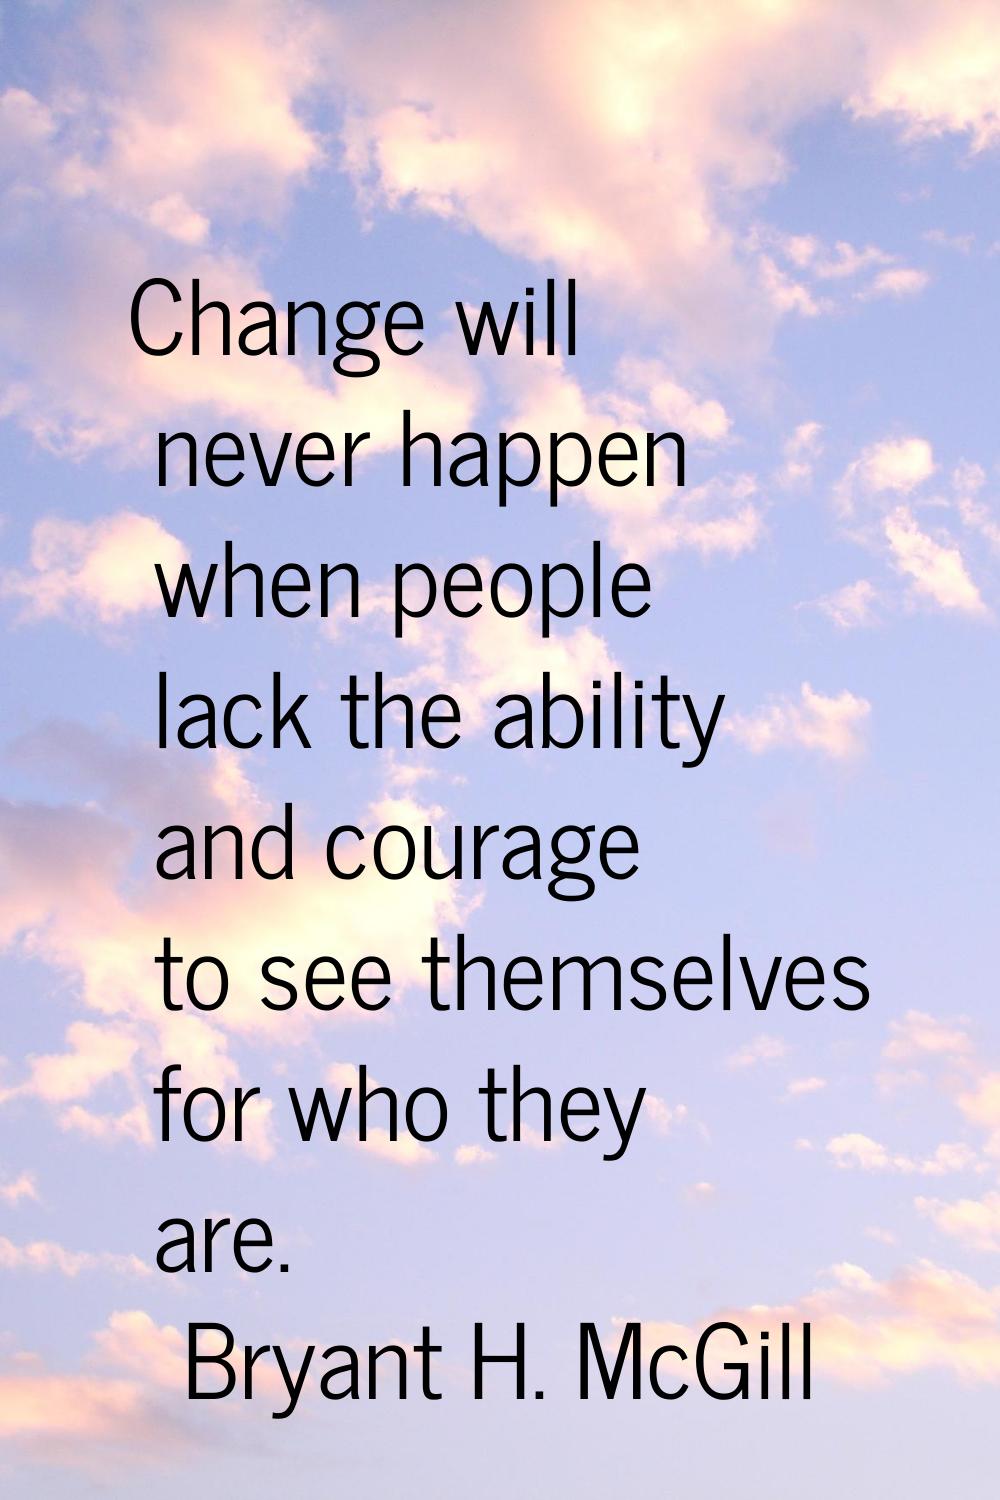 Change will never happen when people lack the ability and courage to see themselves for who they ar